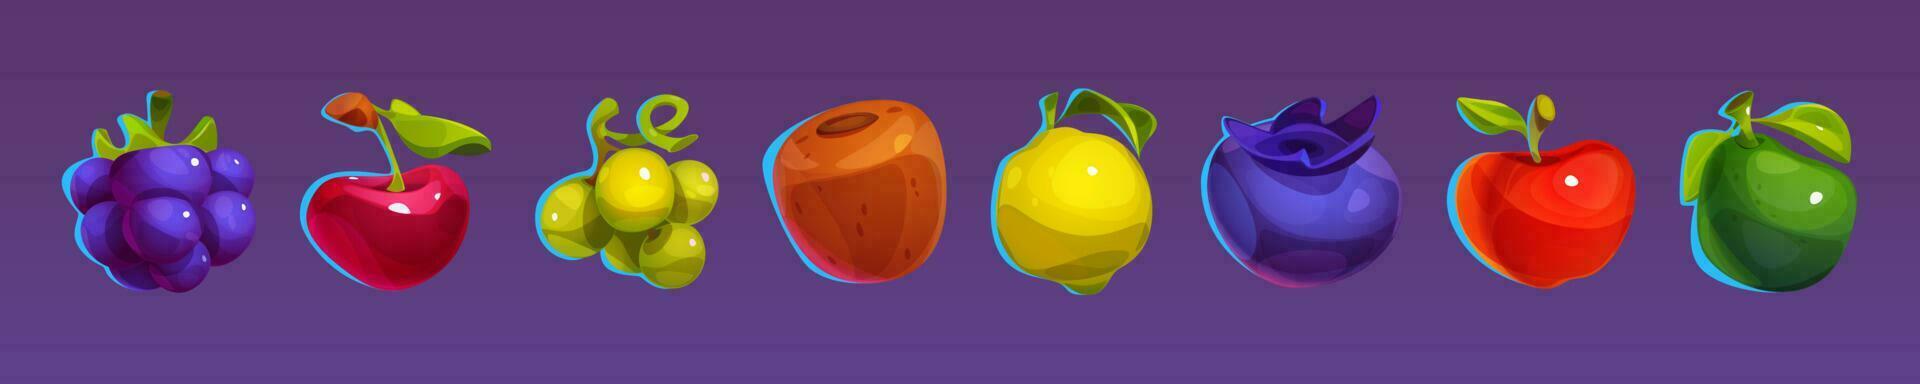 Casino fruit slot, vector icon for match 3 game